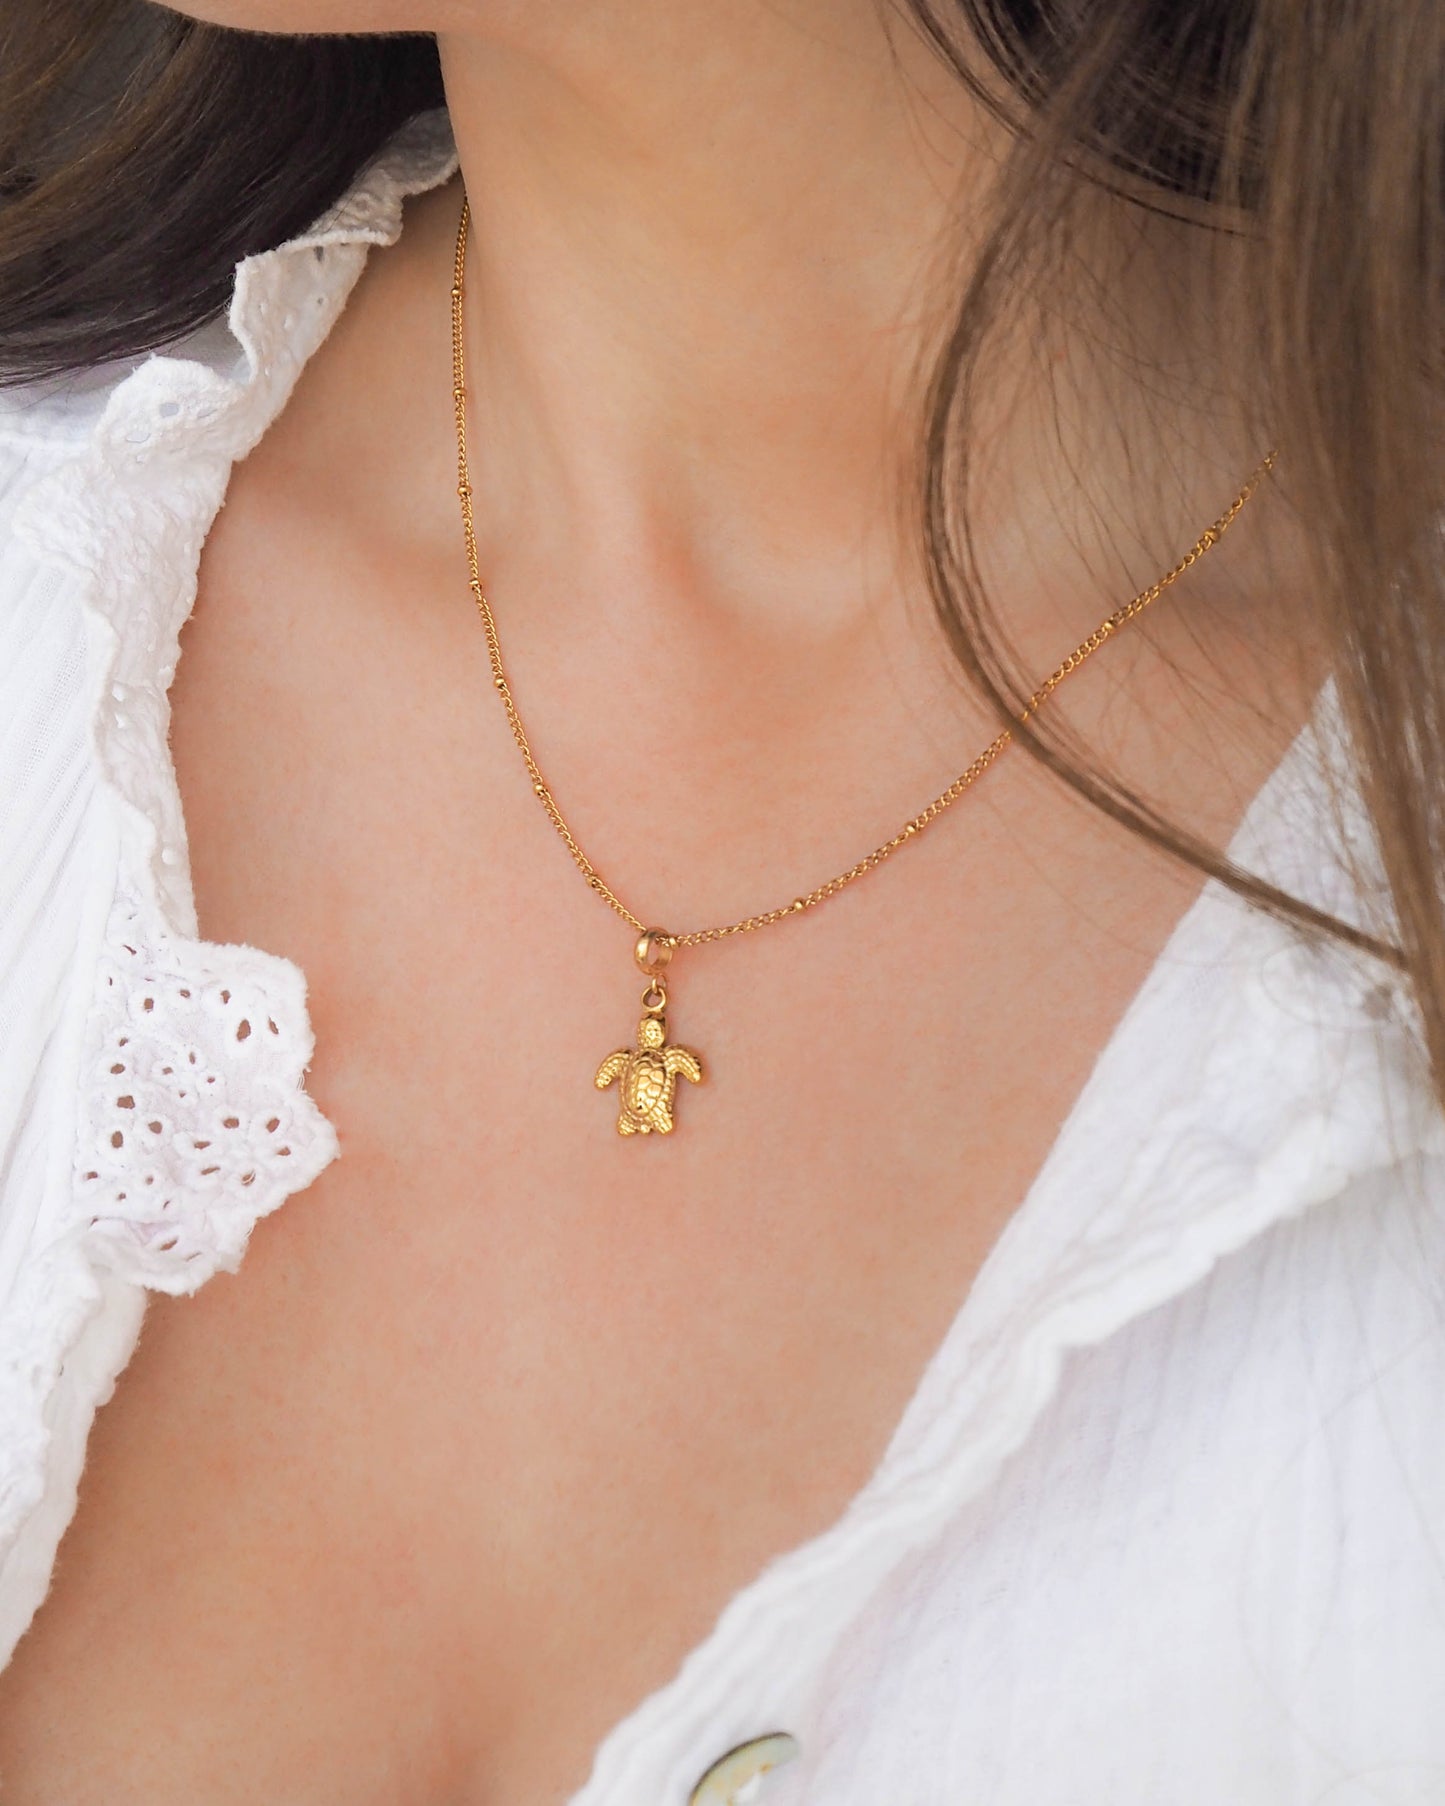 Model wearing Turtle Necklace made with Gold Stainless Steel